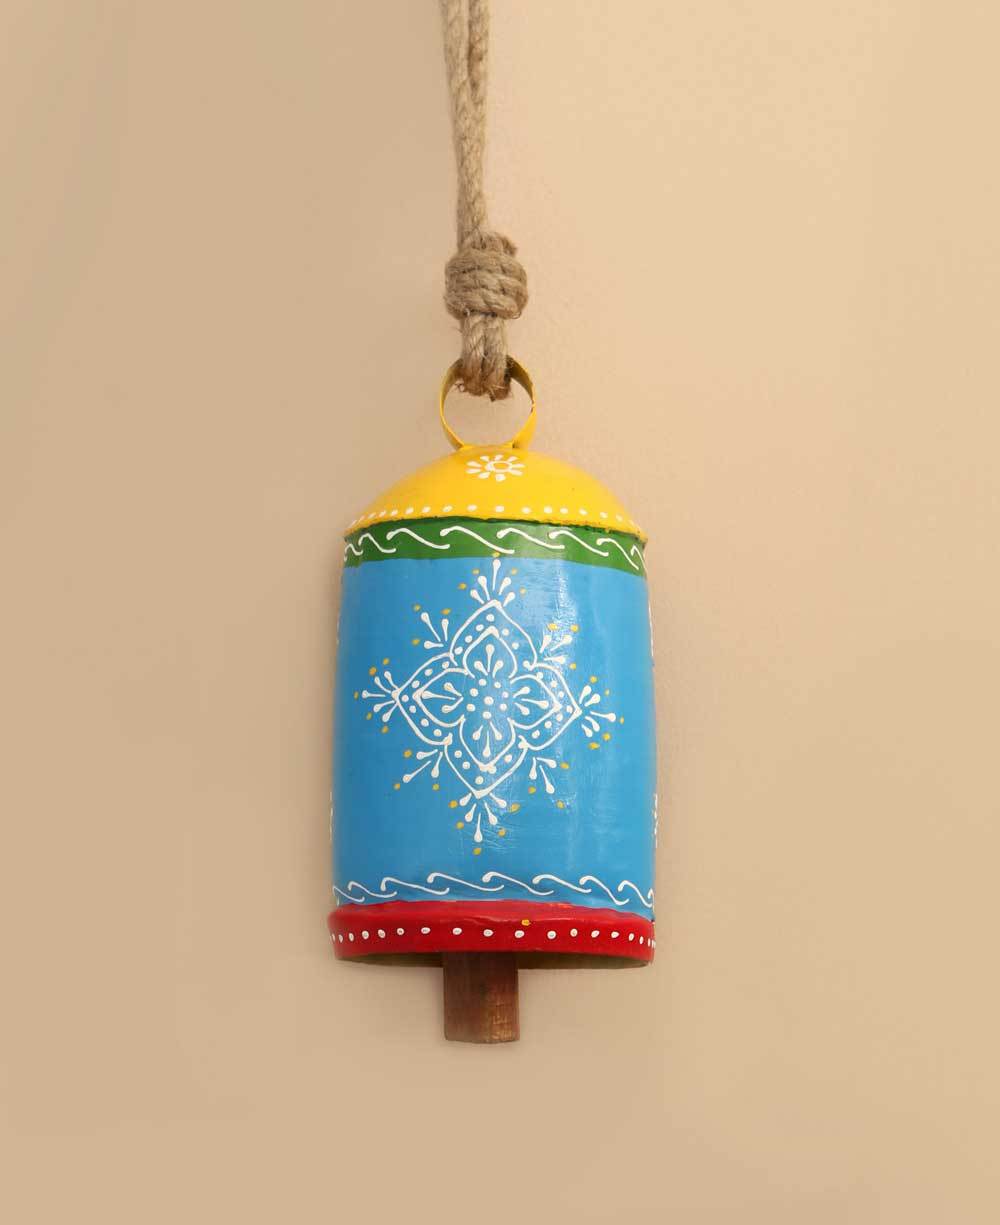 Fairtrade Hand-painted Colorful Bell - Decorative Bells